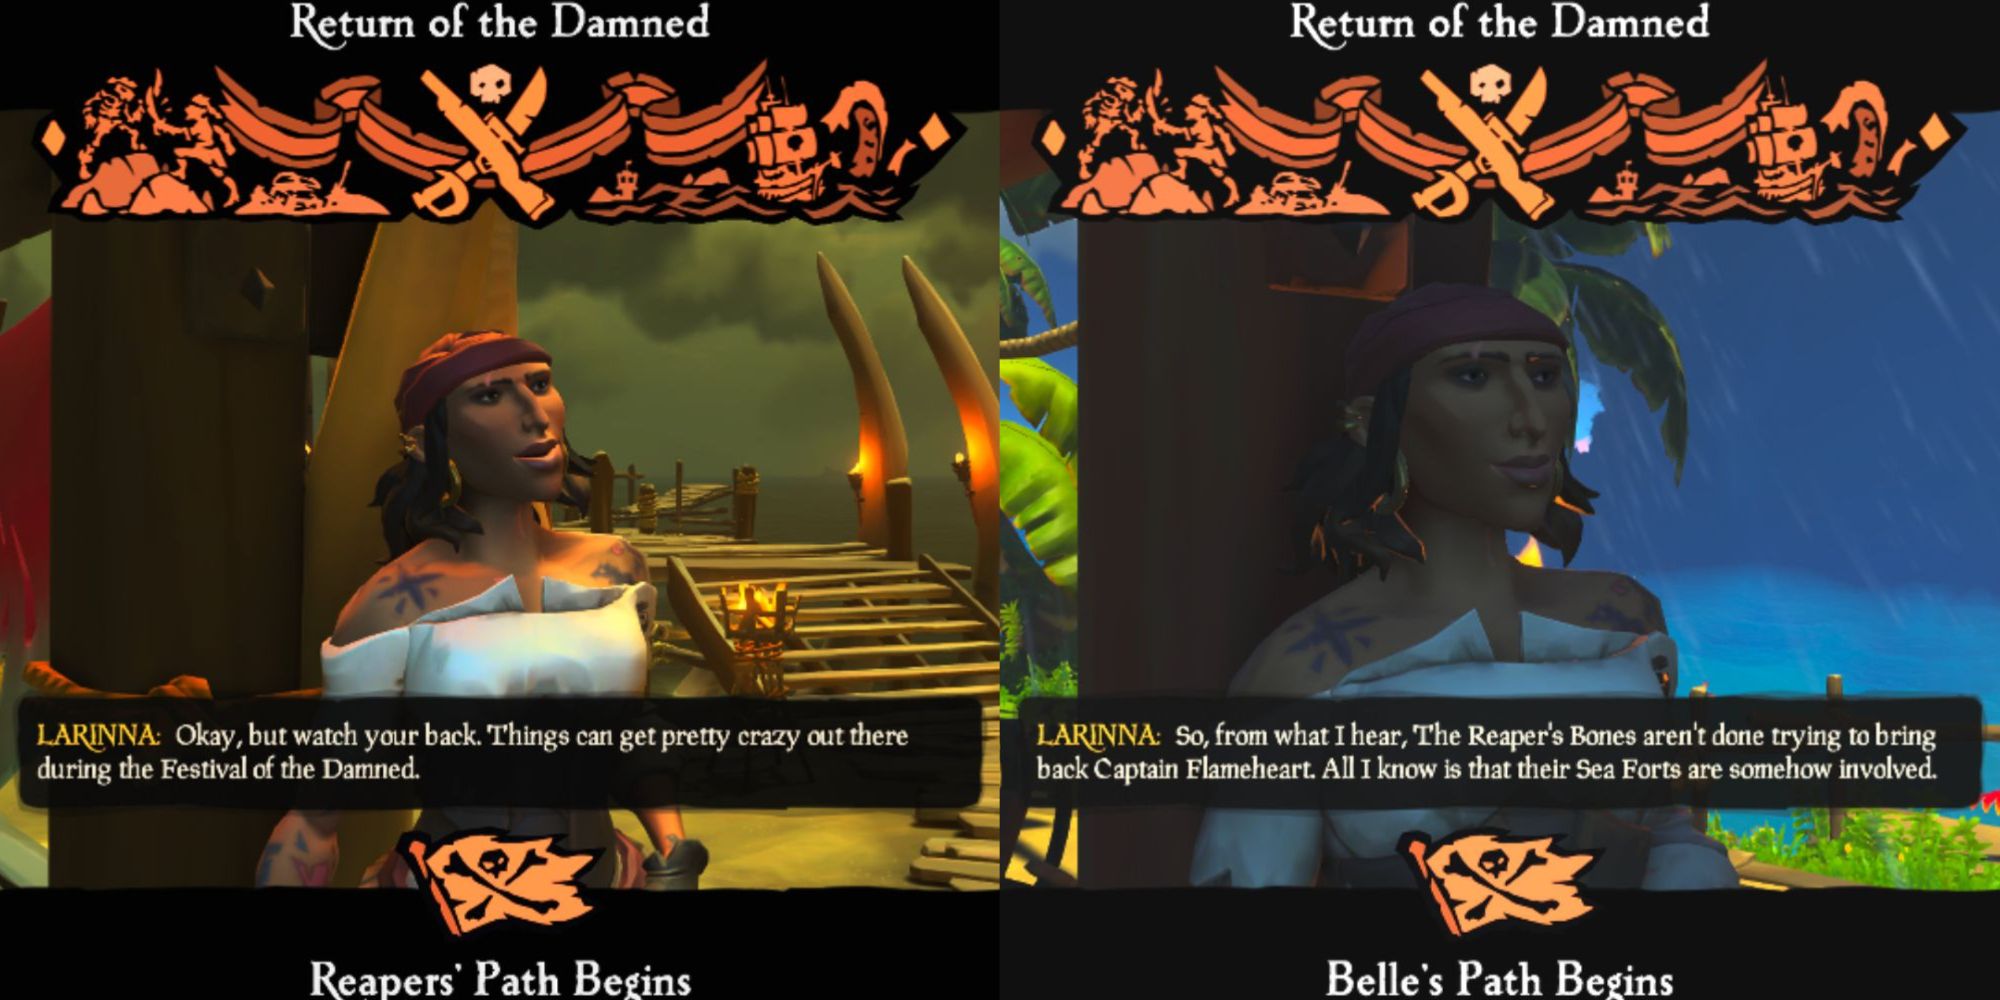 Reapers' Path And Belle's Path From Larinna In Adventure 9 Return Of The Damned Sea Of Thieves